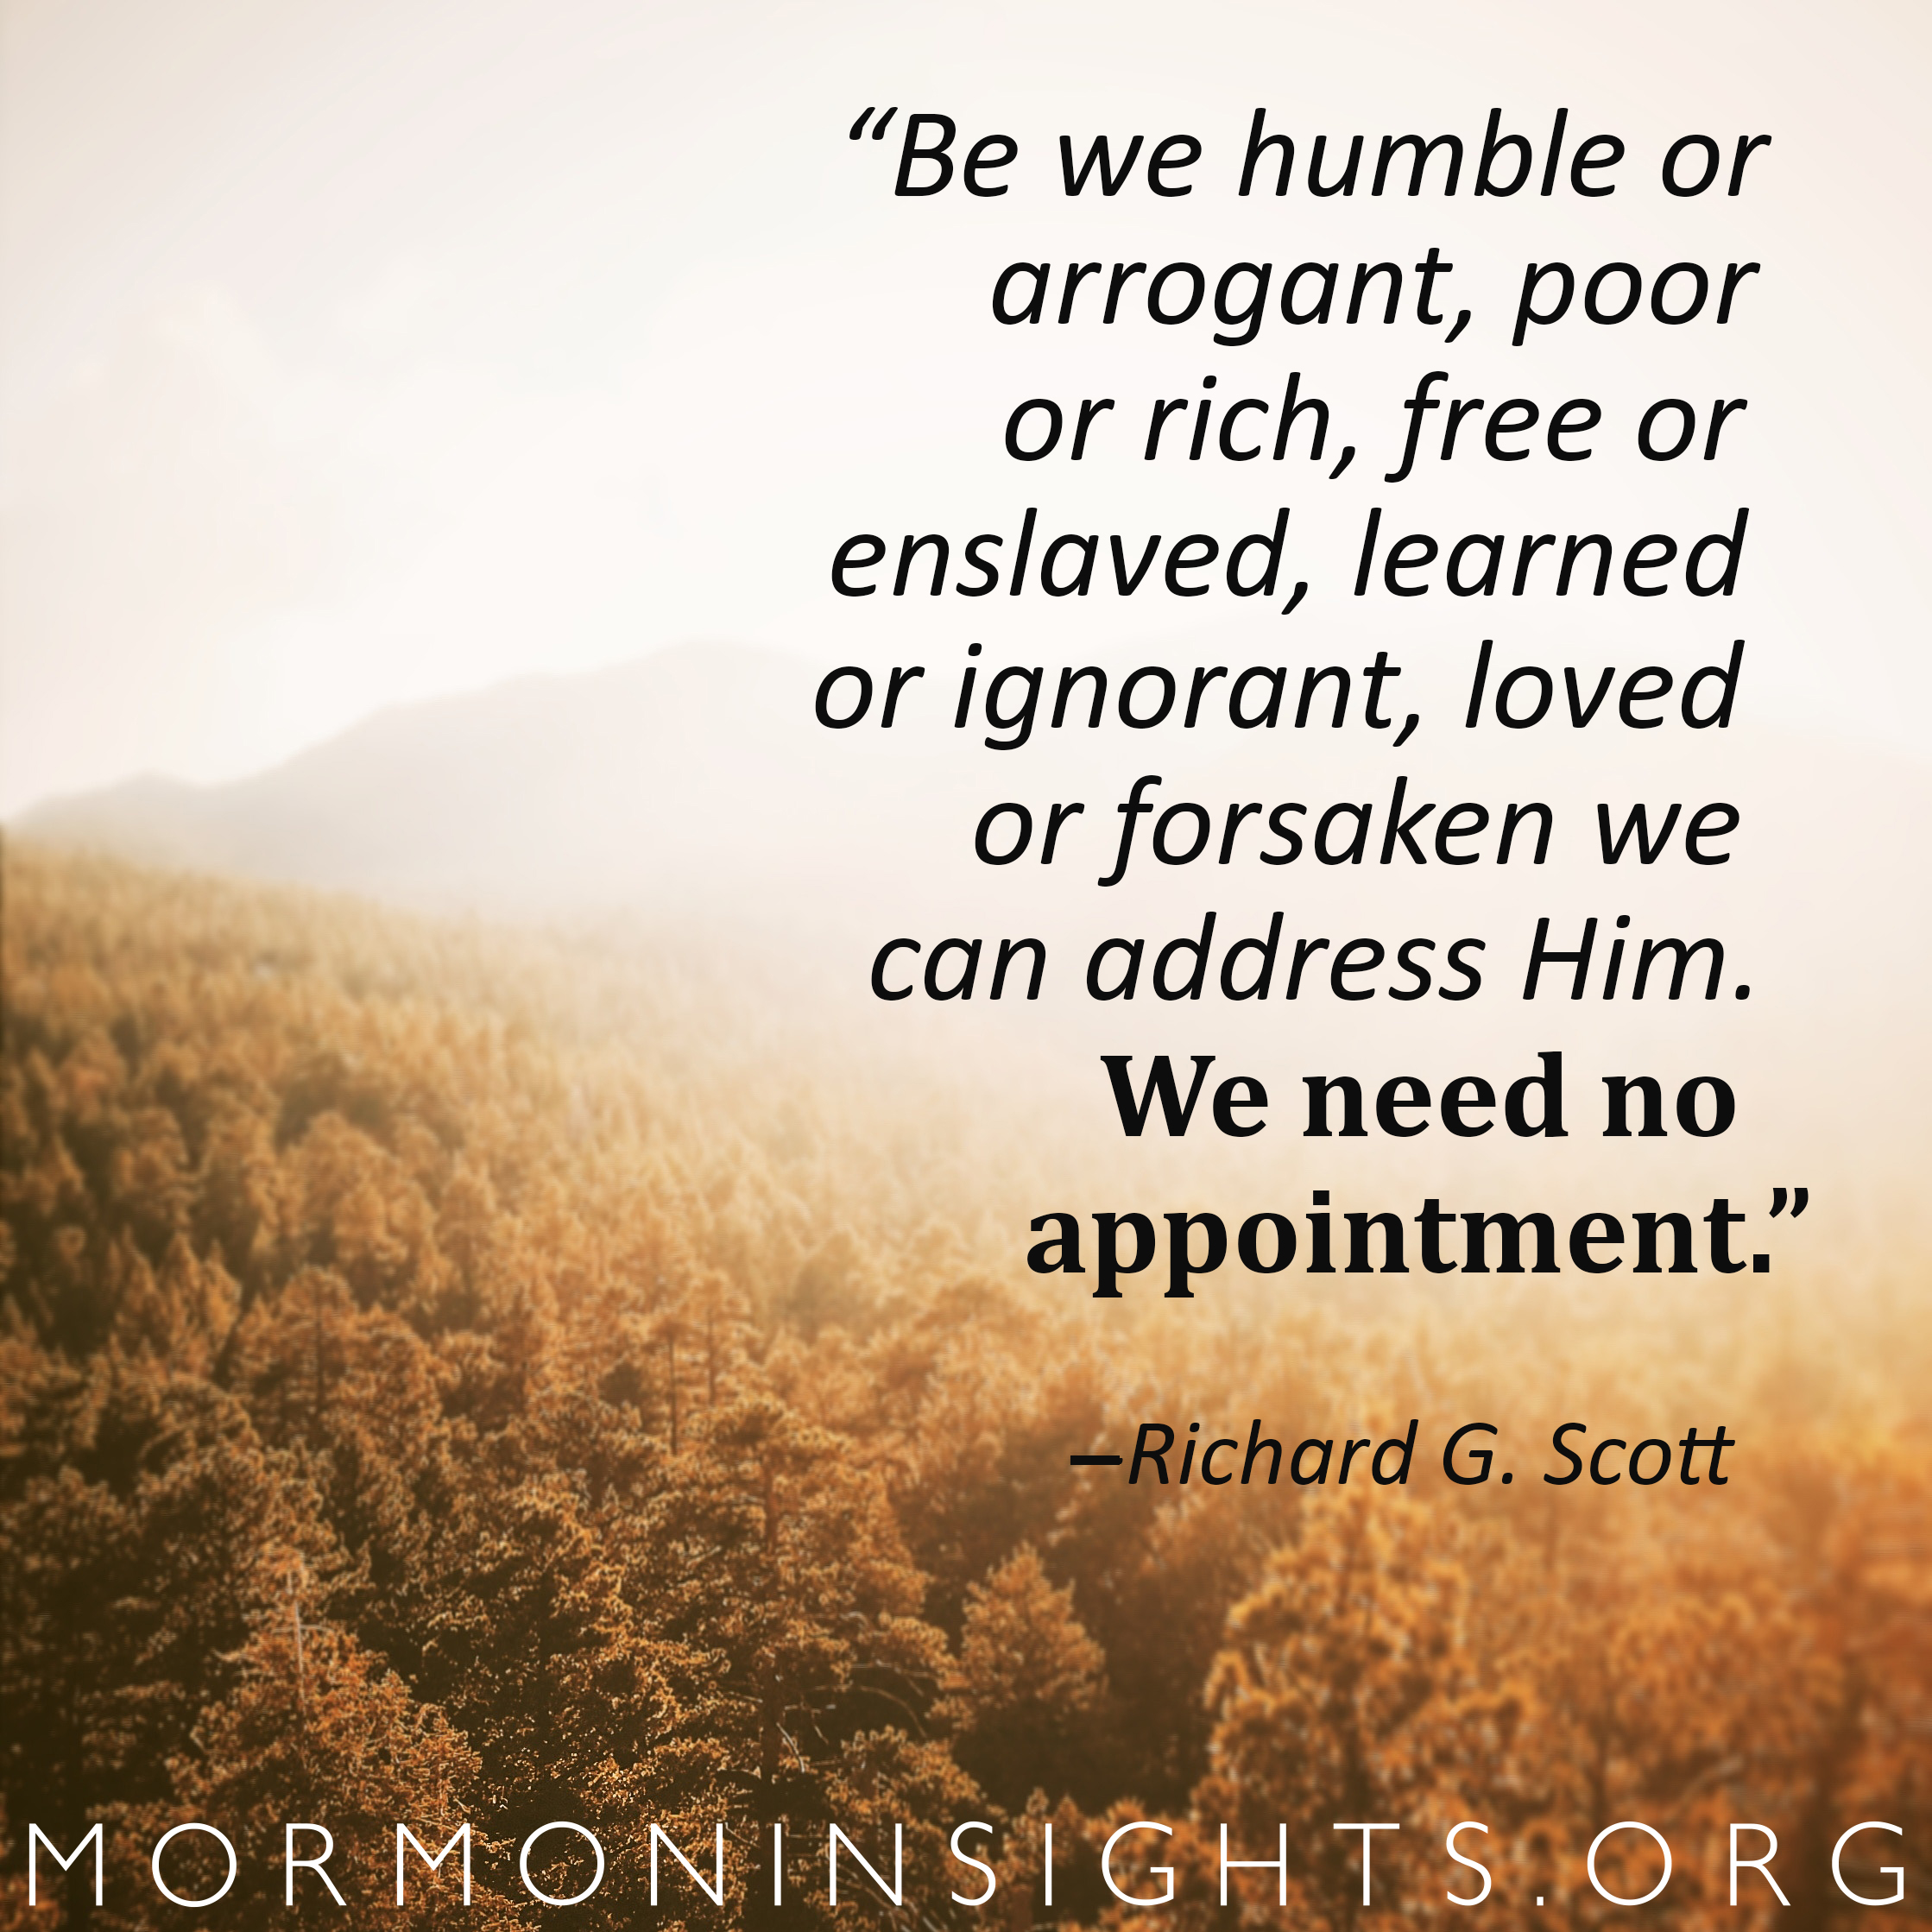 "Be we humble or arrogant, poor or rich, free or enslaved, learned or ignorant, loved or forsaken we can address him. We need no appointment" - Richard G. Scott